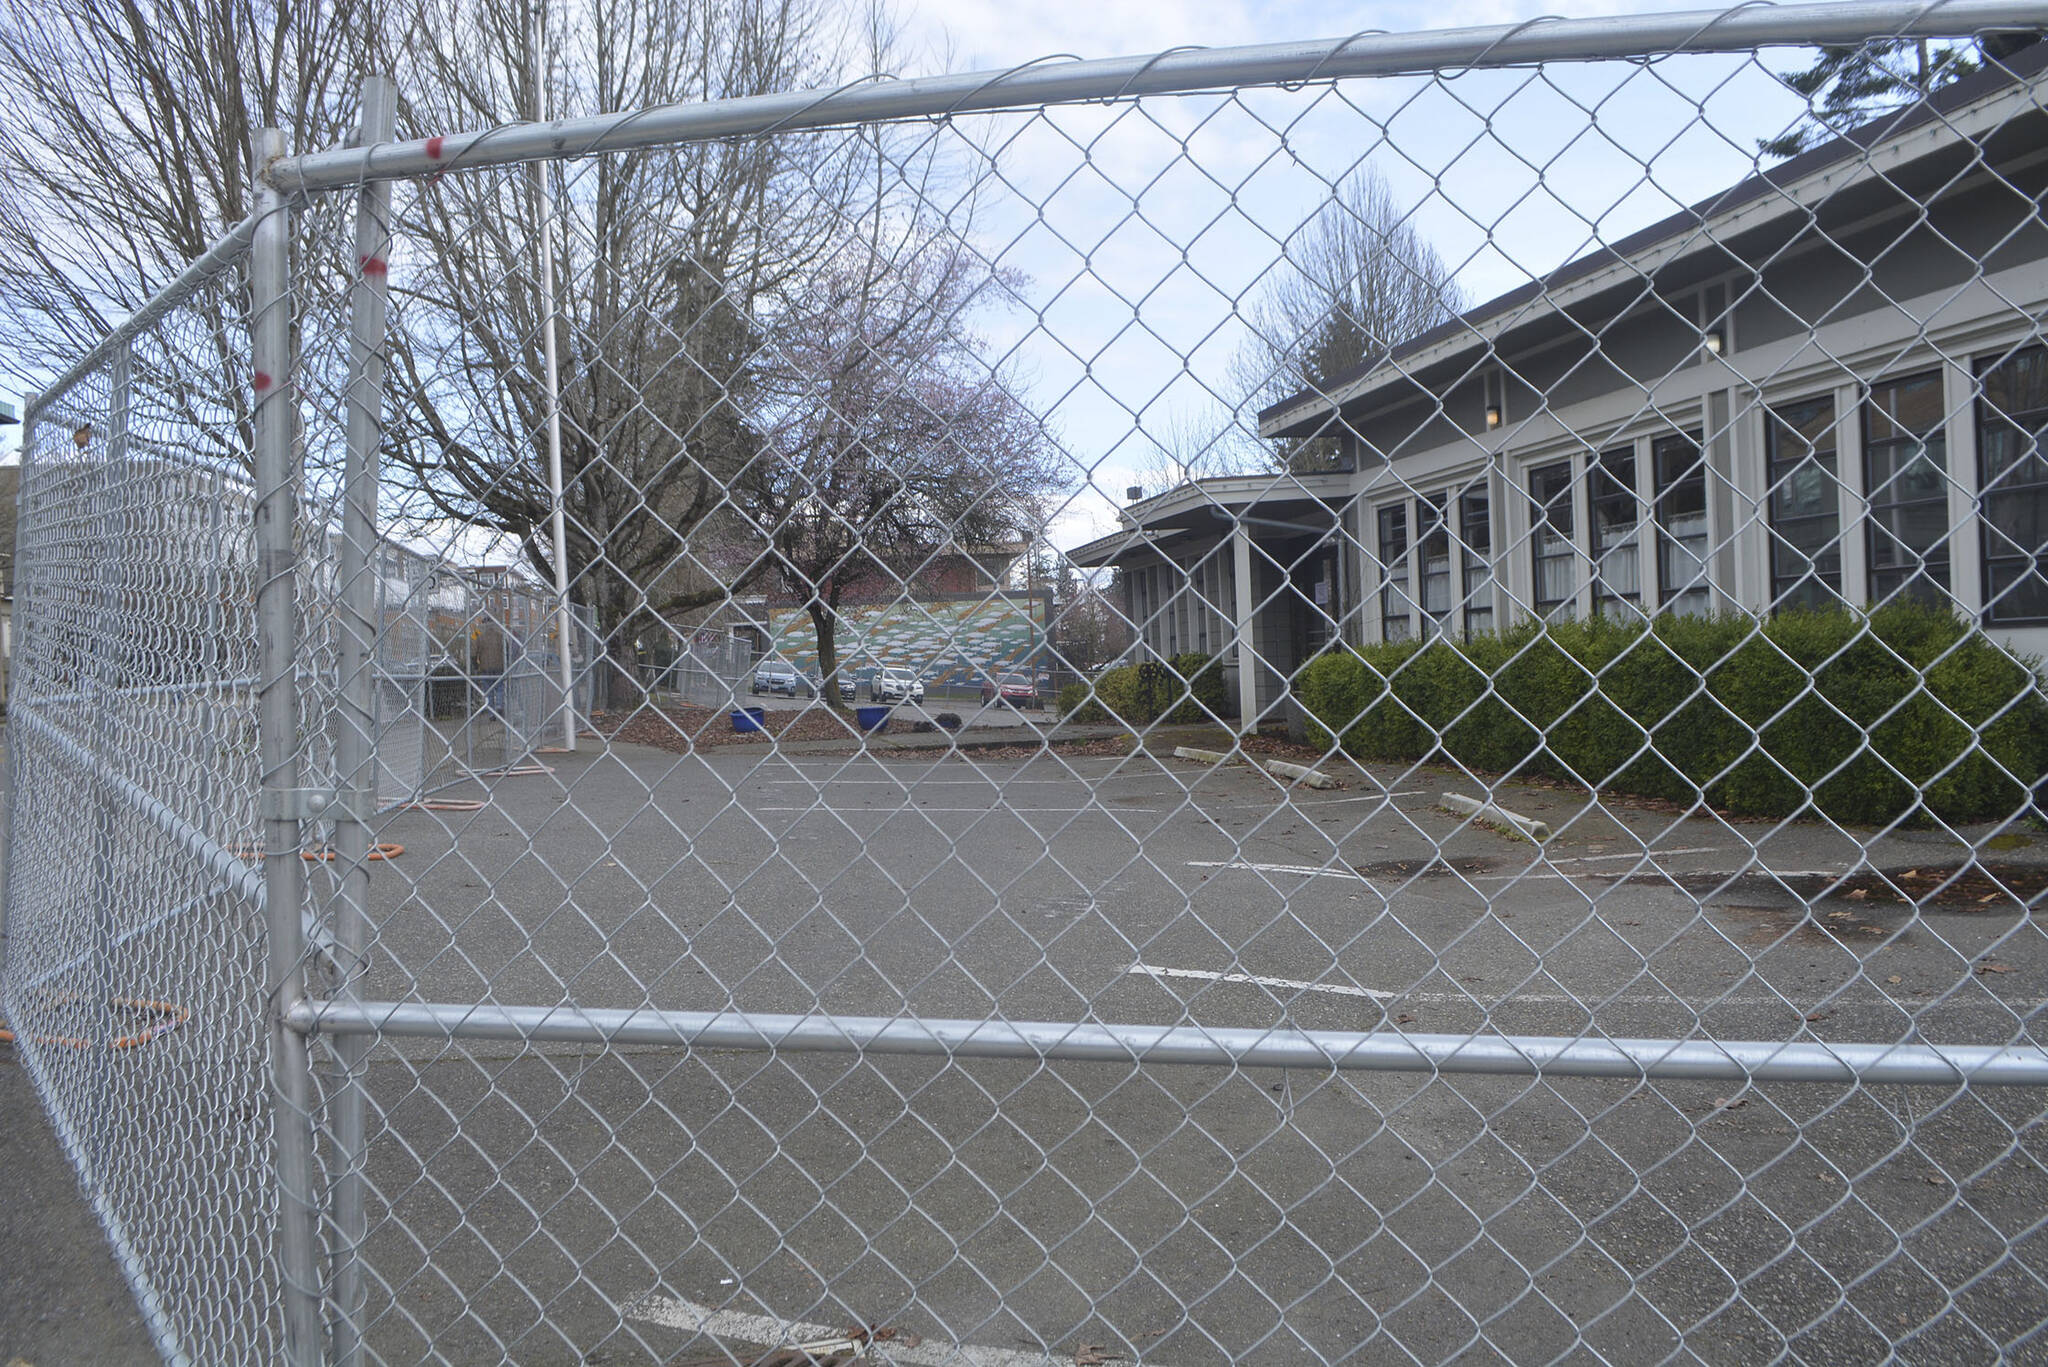 A fence has been placed around the old police station on Bainbridge. The council will look to OK a contract to demolish the building March 12.